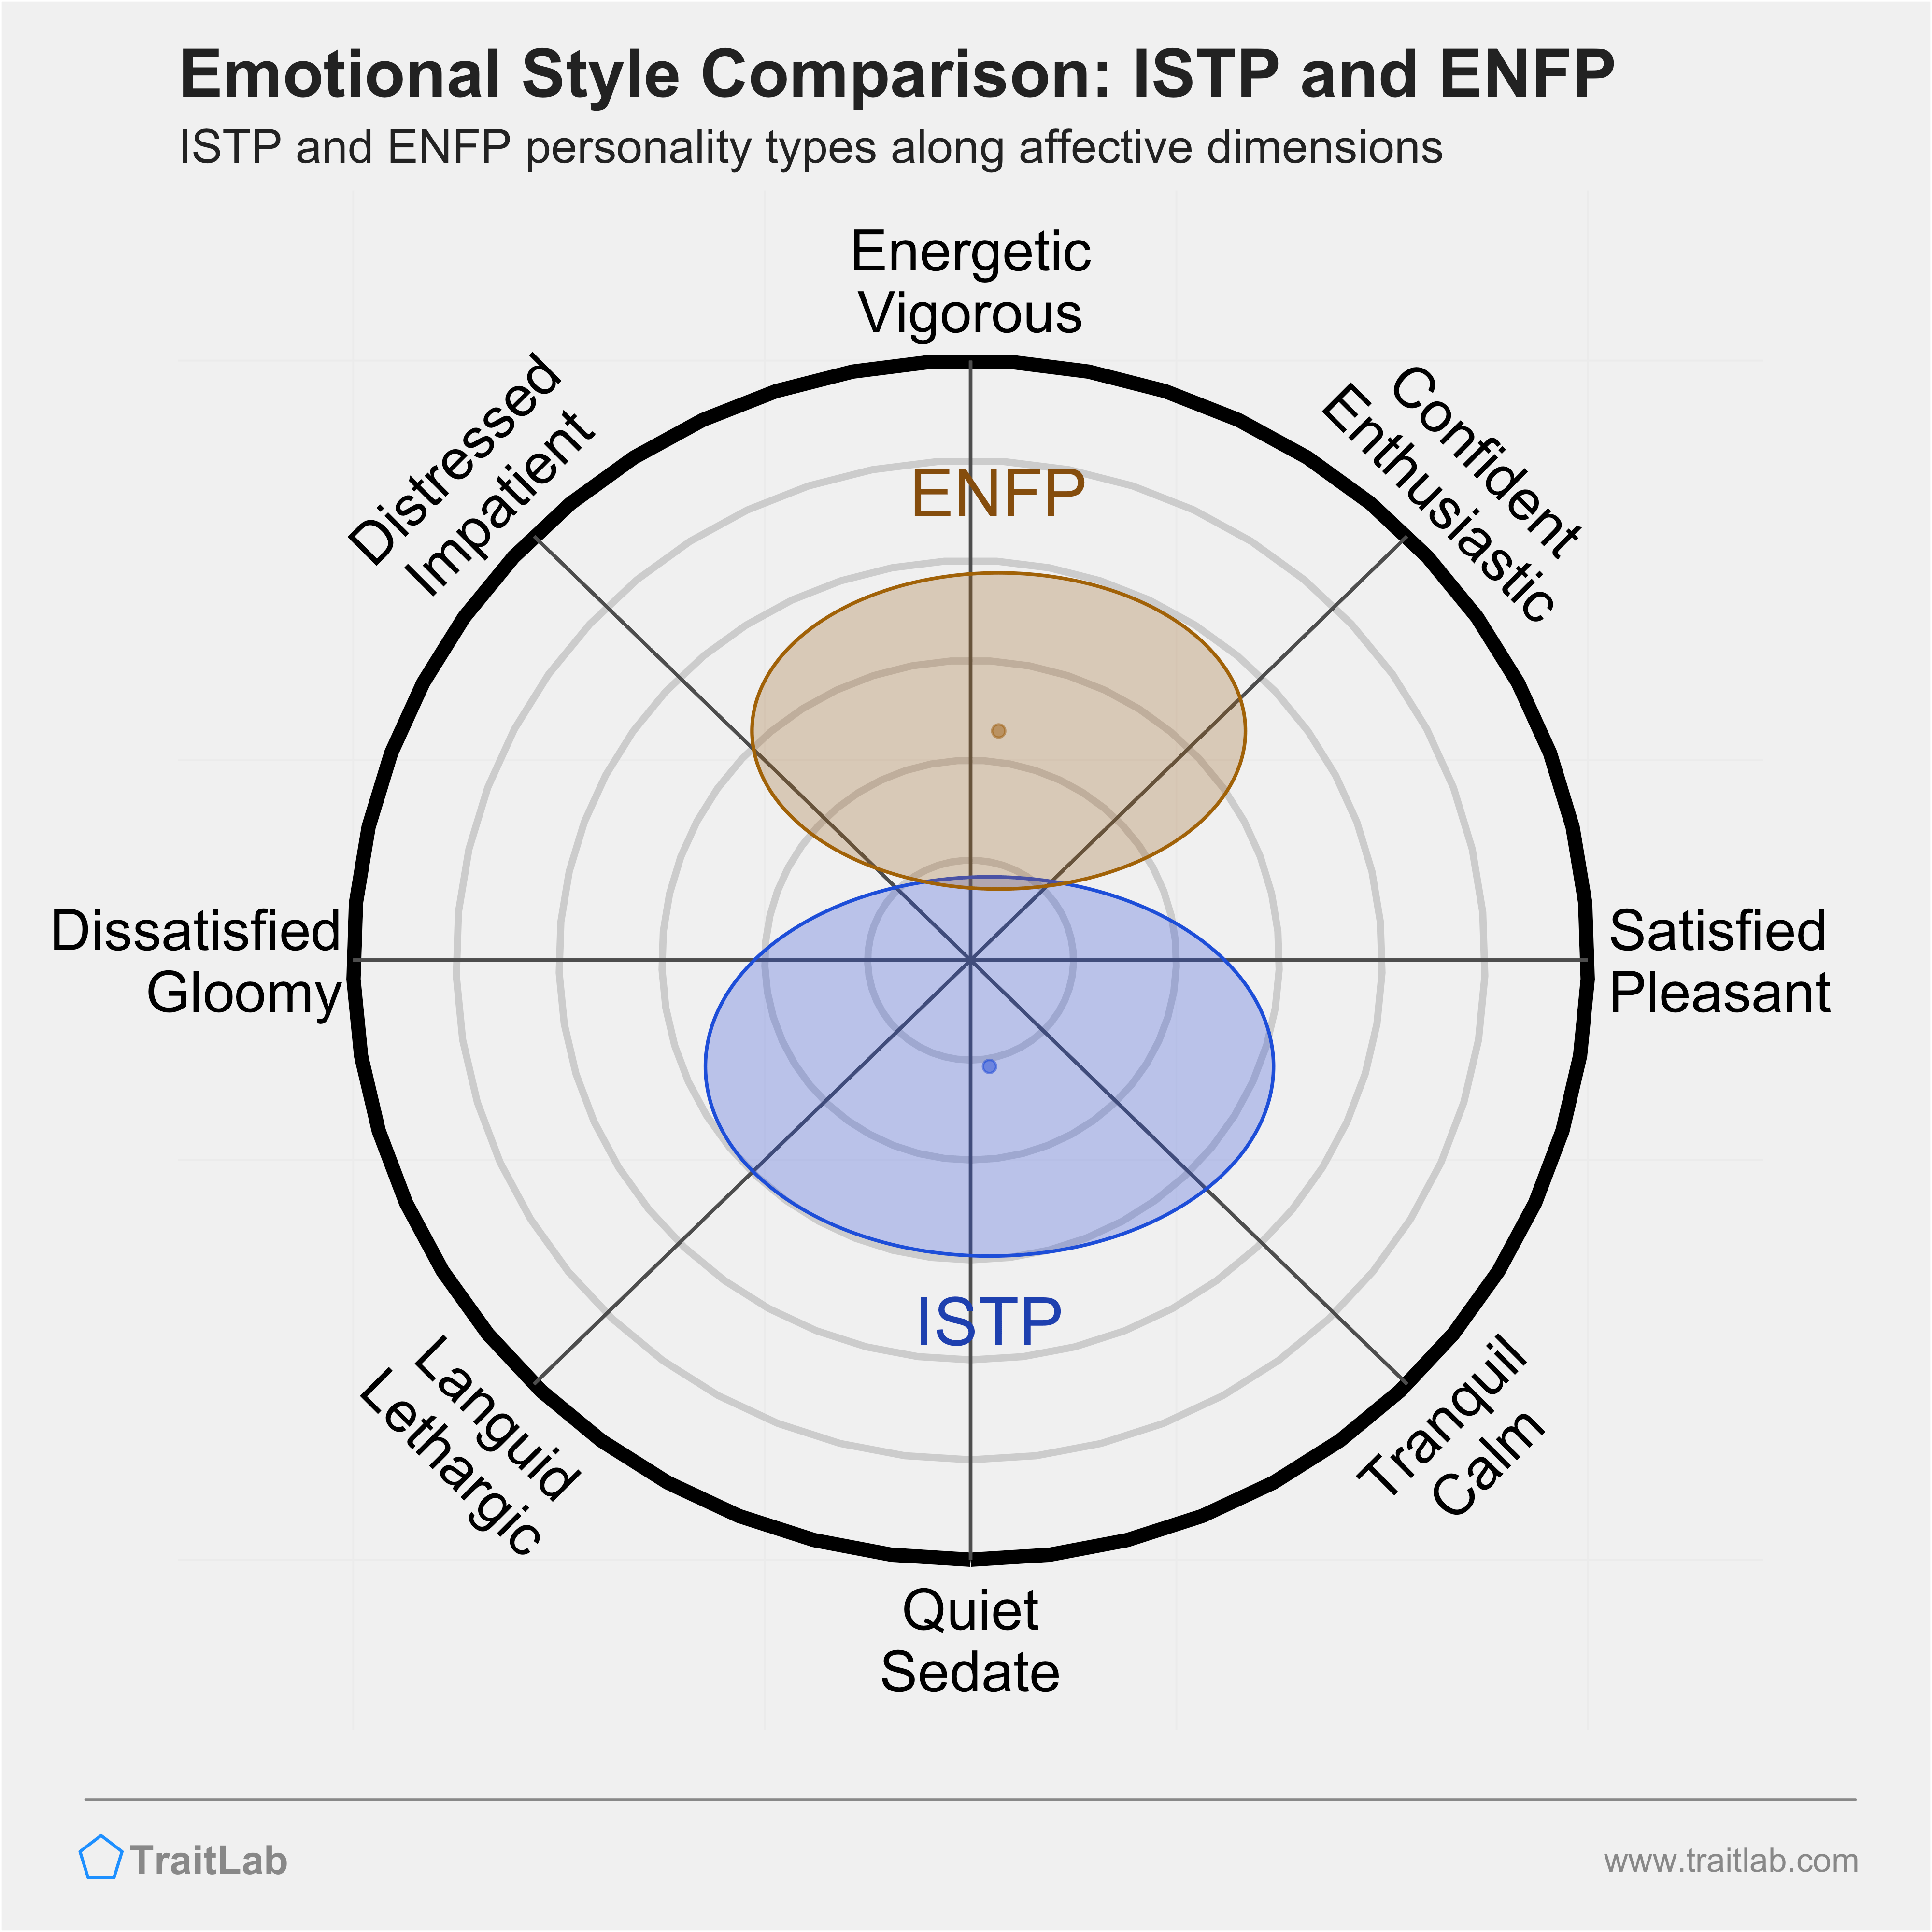 ISTP and ENFP comparison across emotional (affective) dimensions